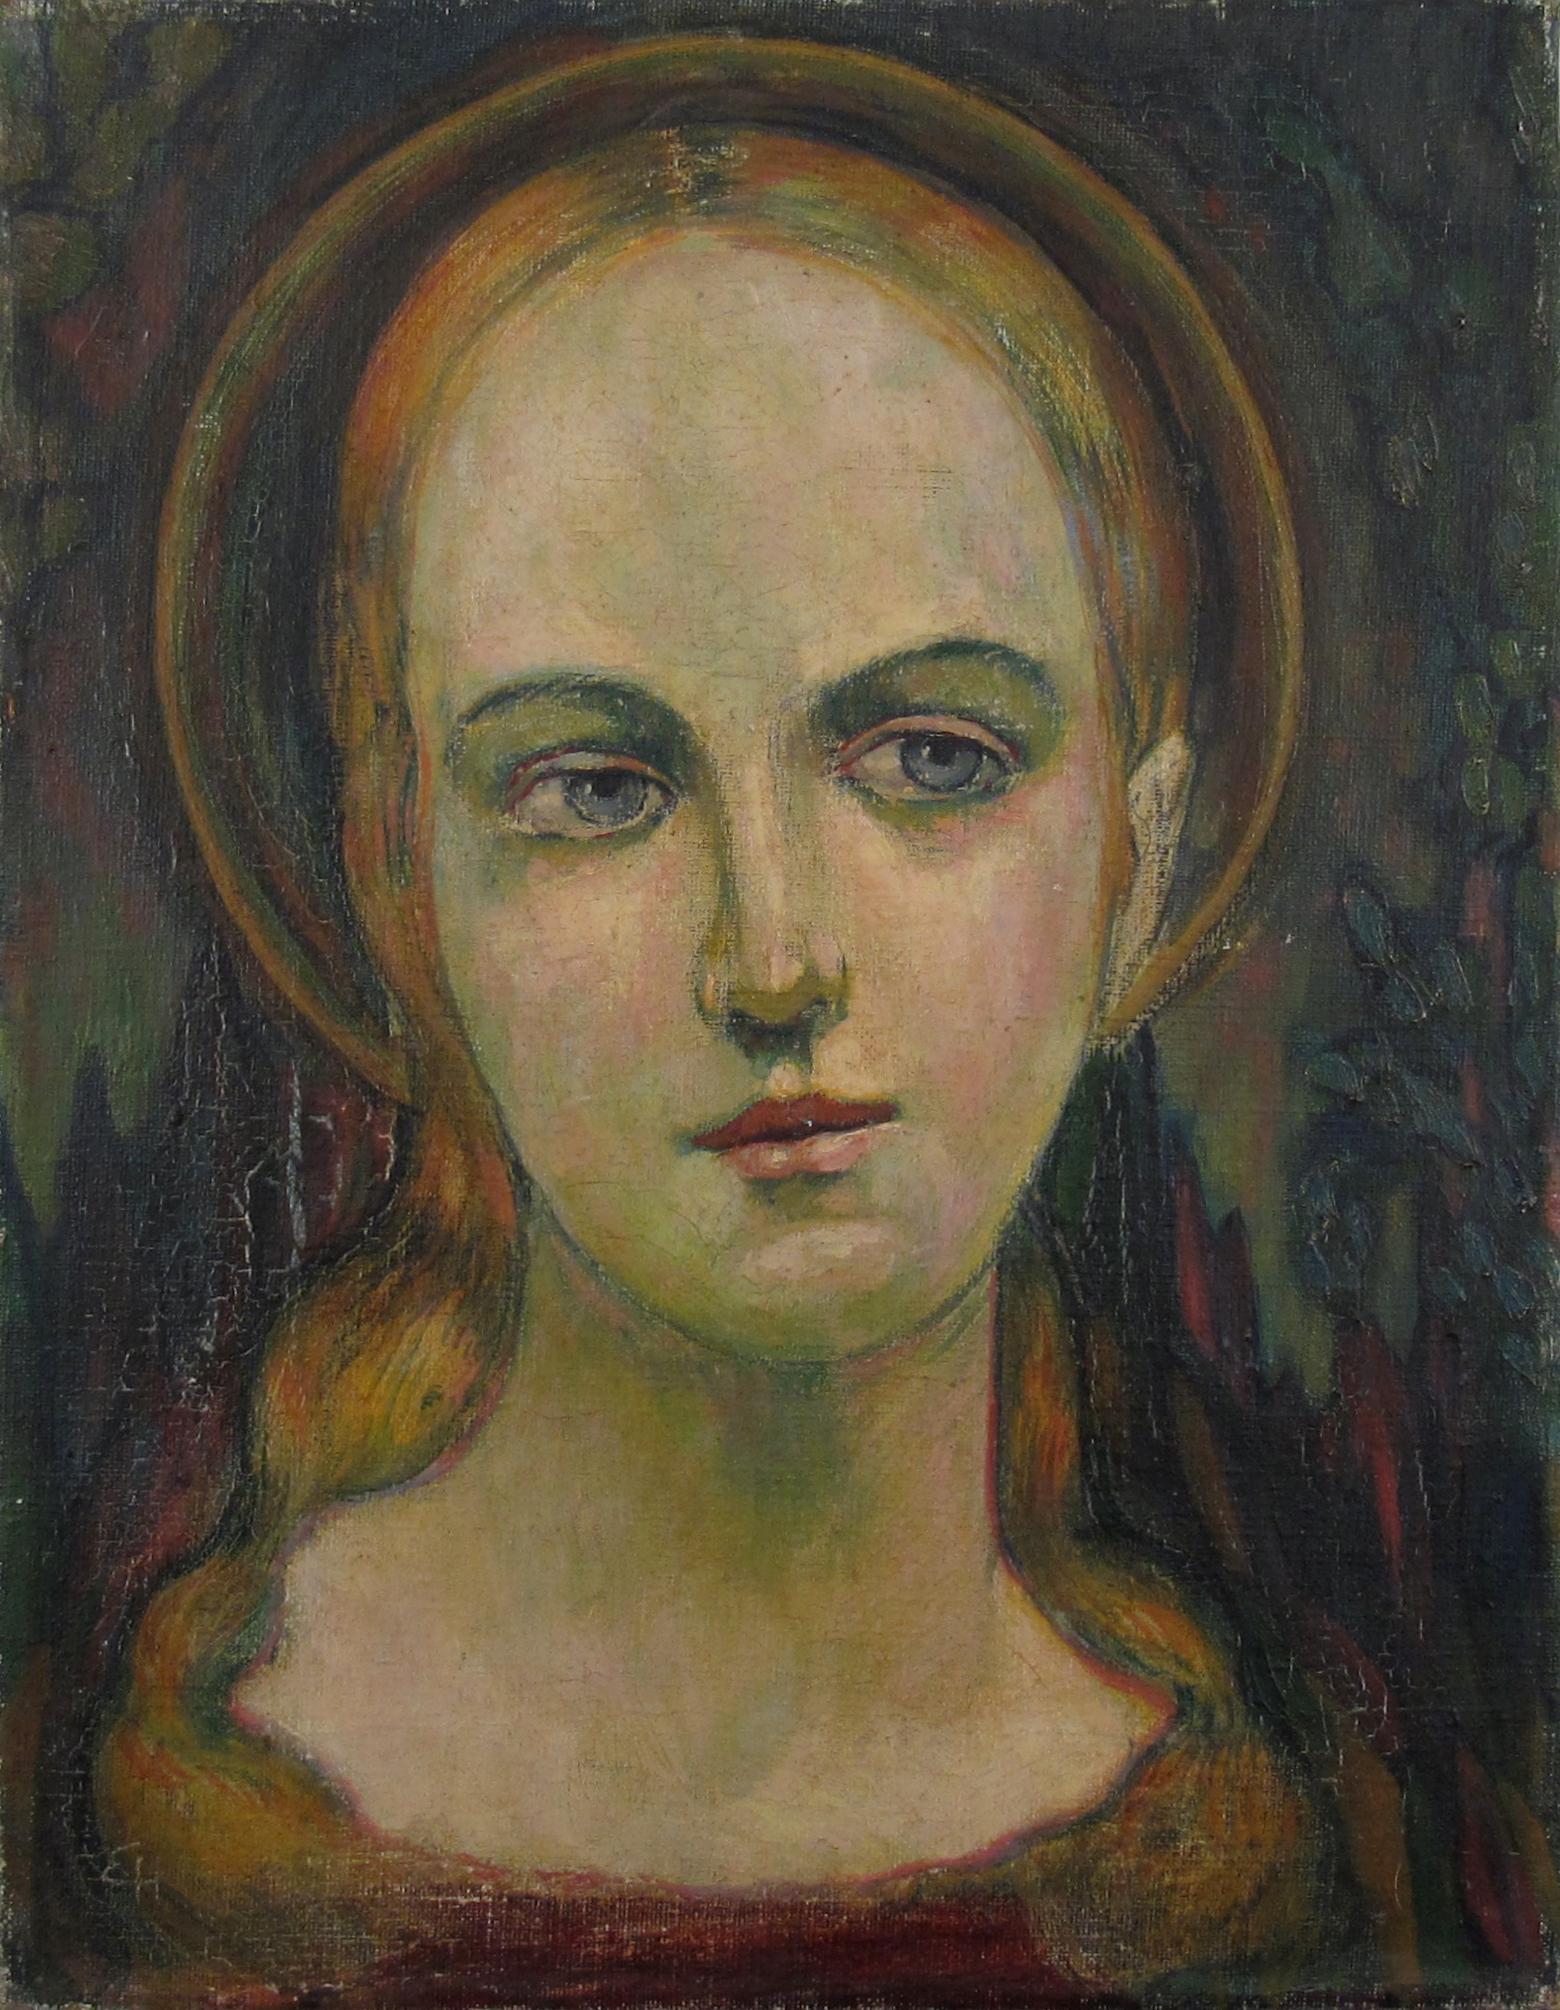 Monogrammed EH Portrait Female Saint Expressionist German School c. 1925 Germany - Painting by Unknown